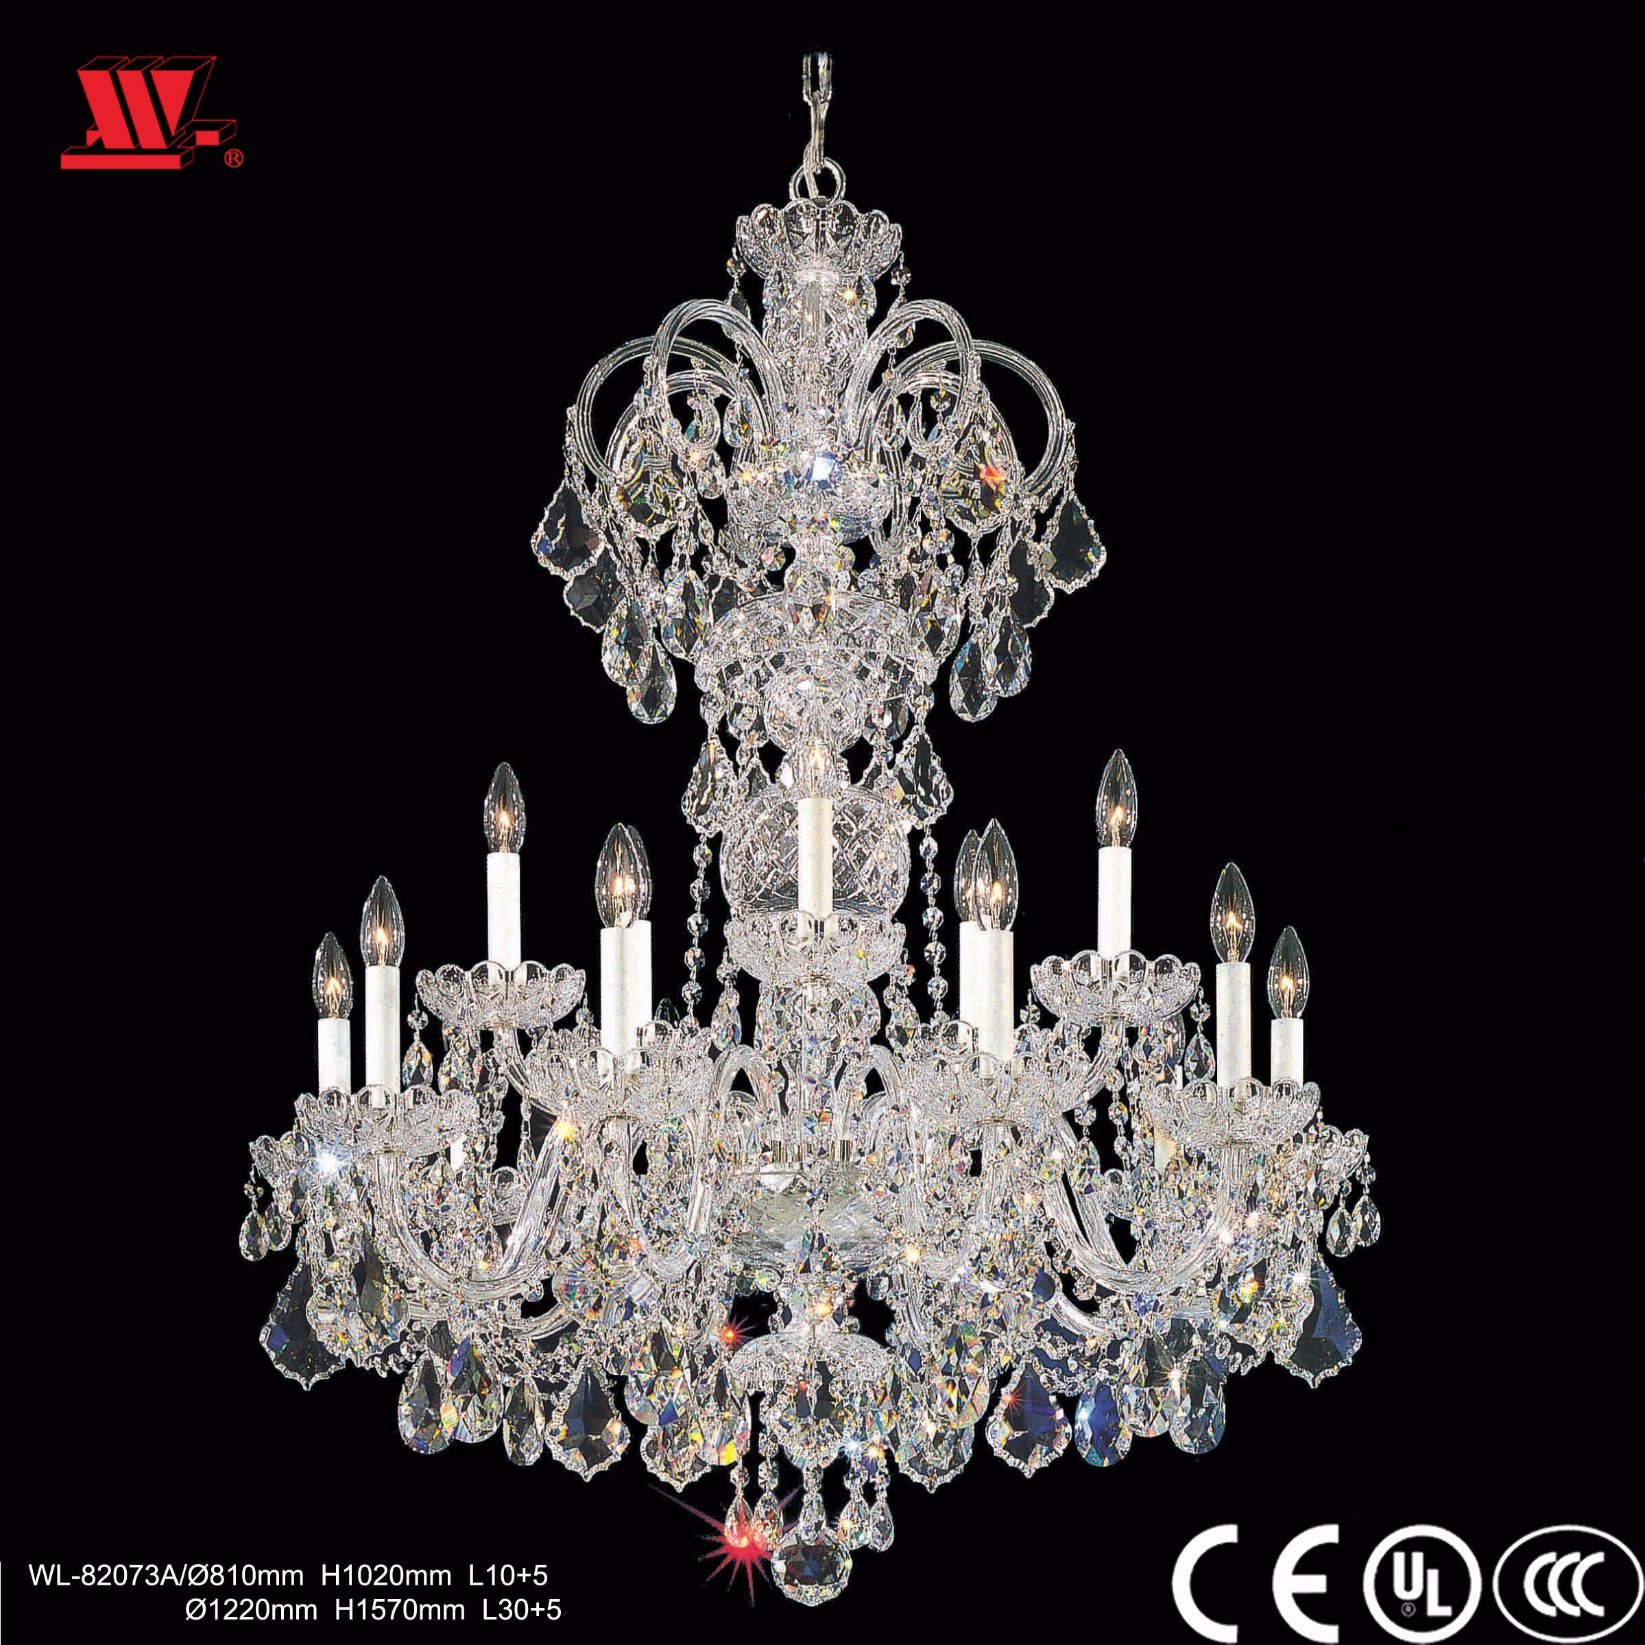 Traditional Crystal Chandelier Wl-82073A